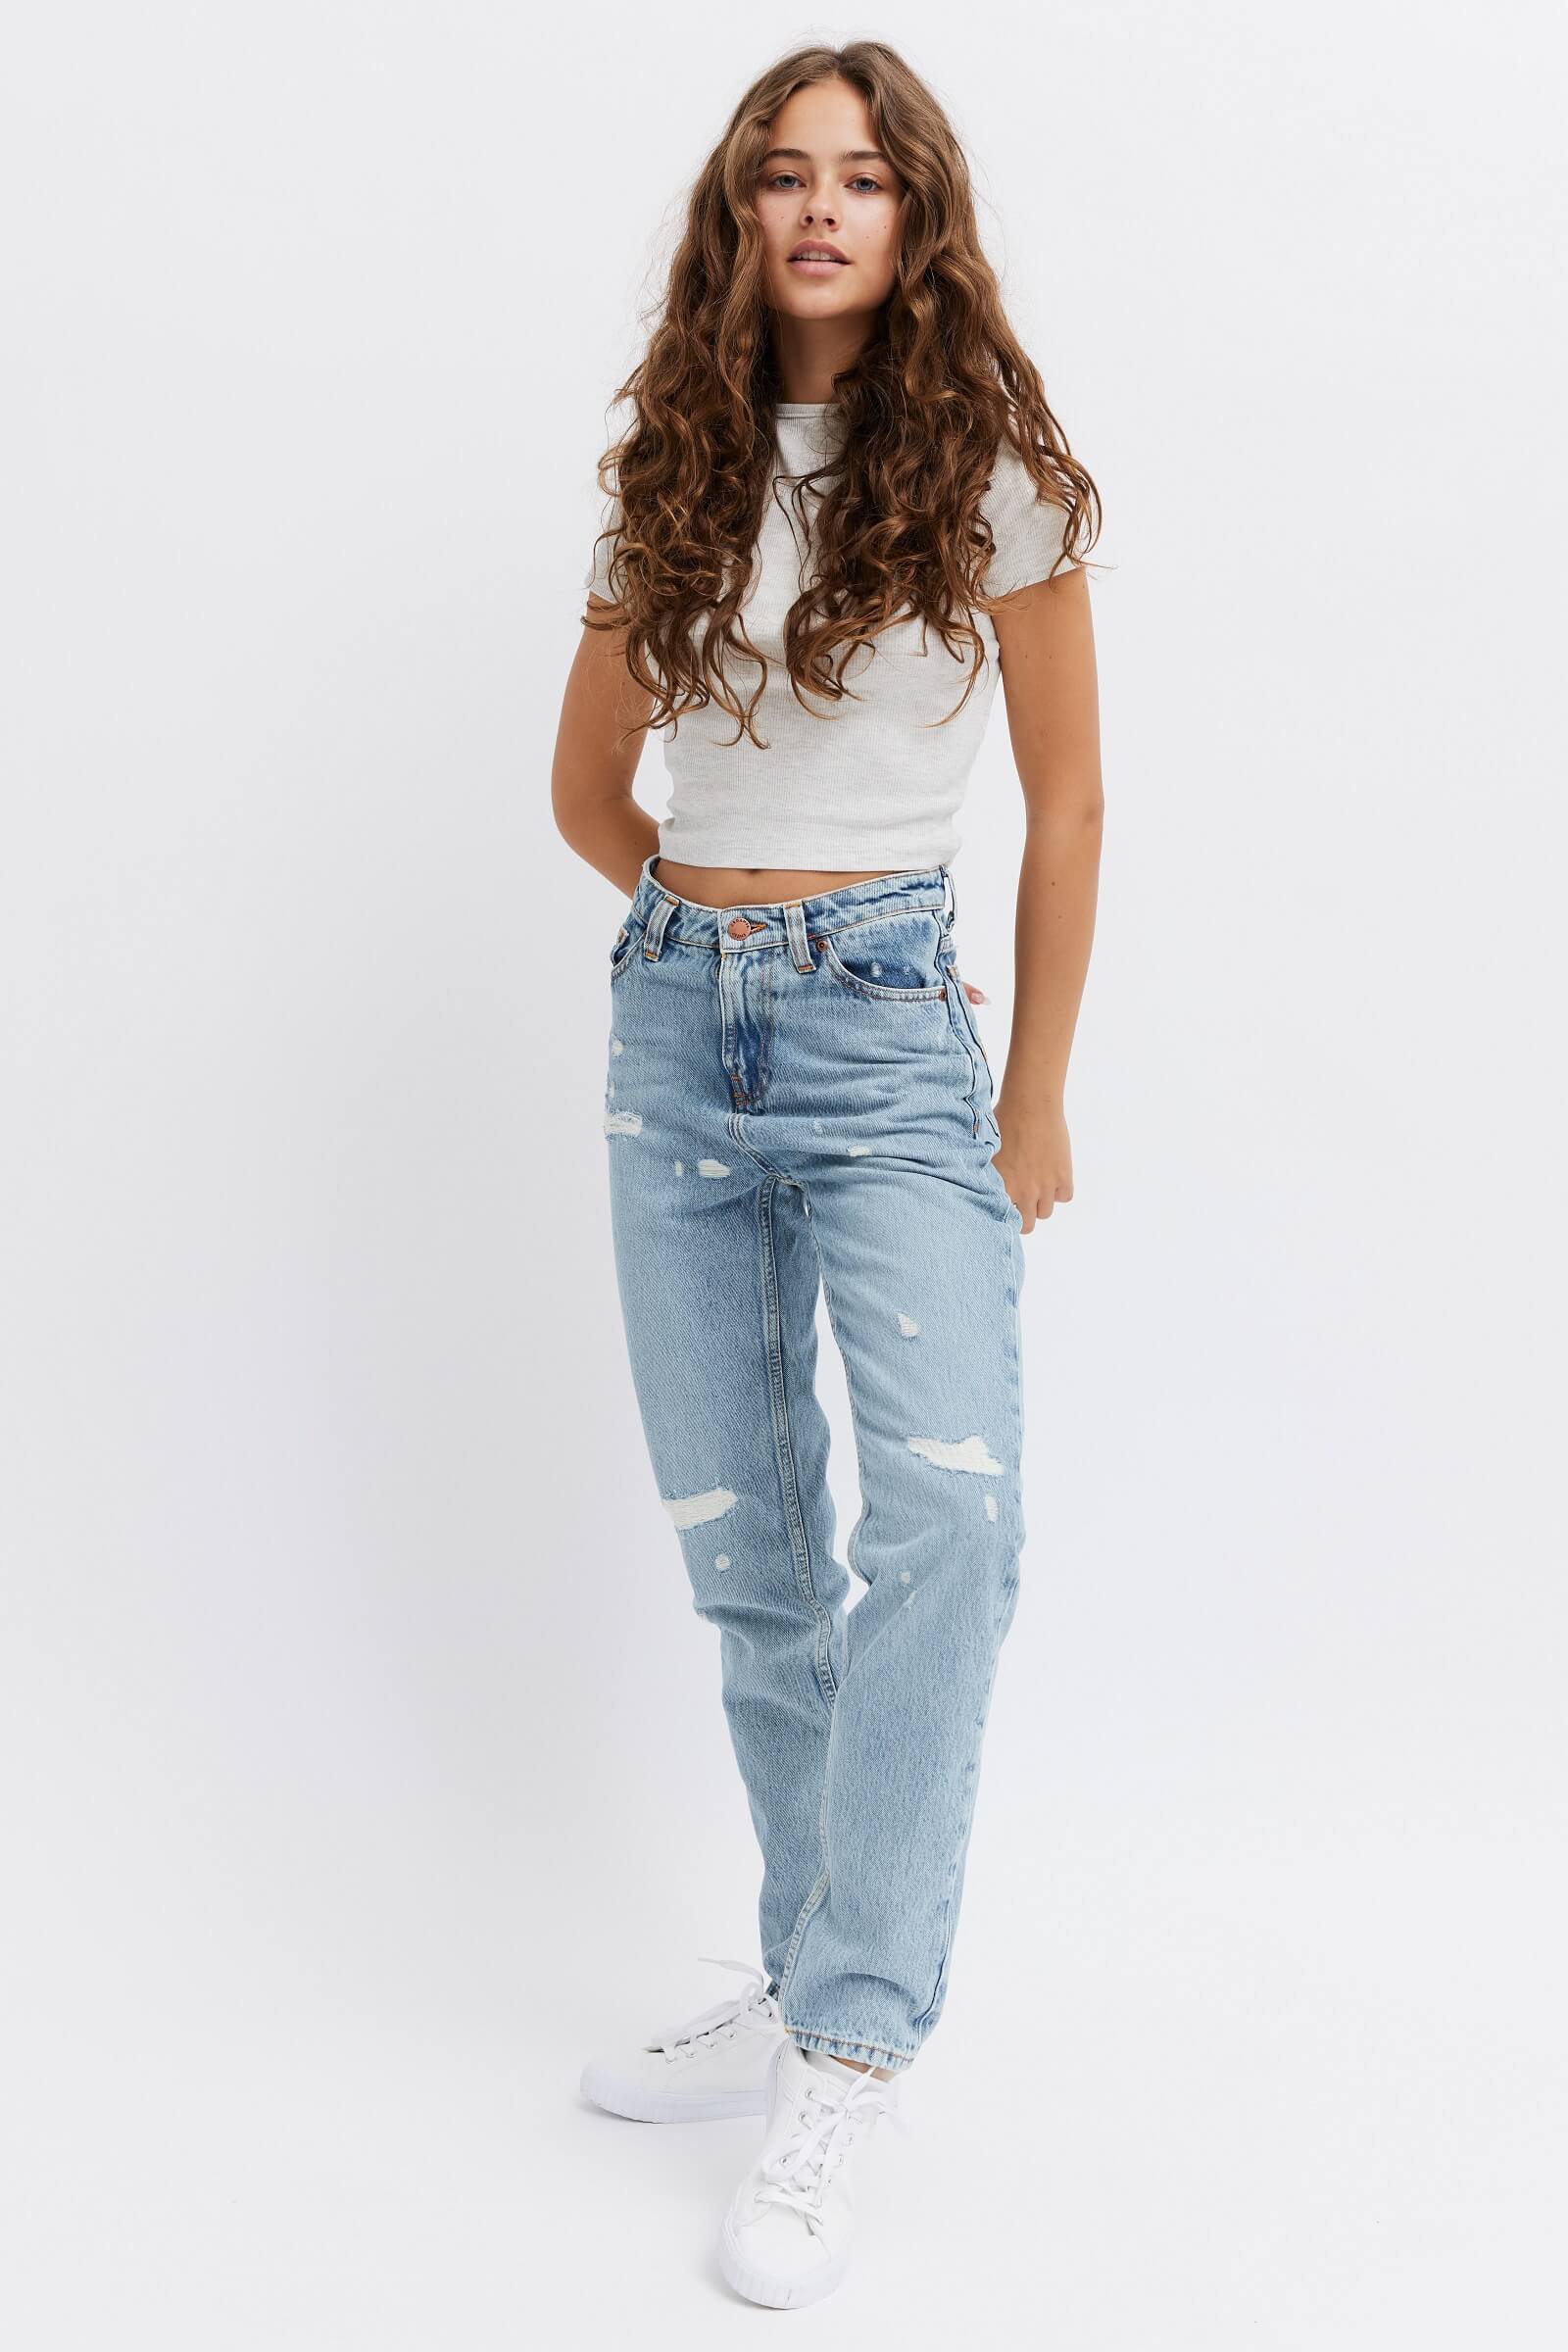 Best ripped jeans for women